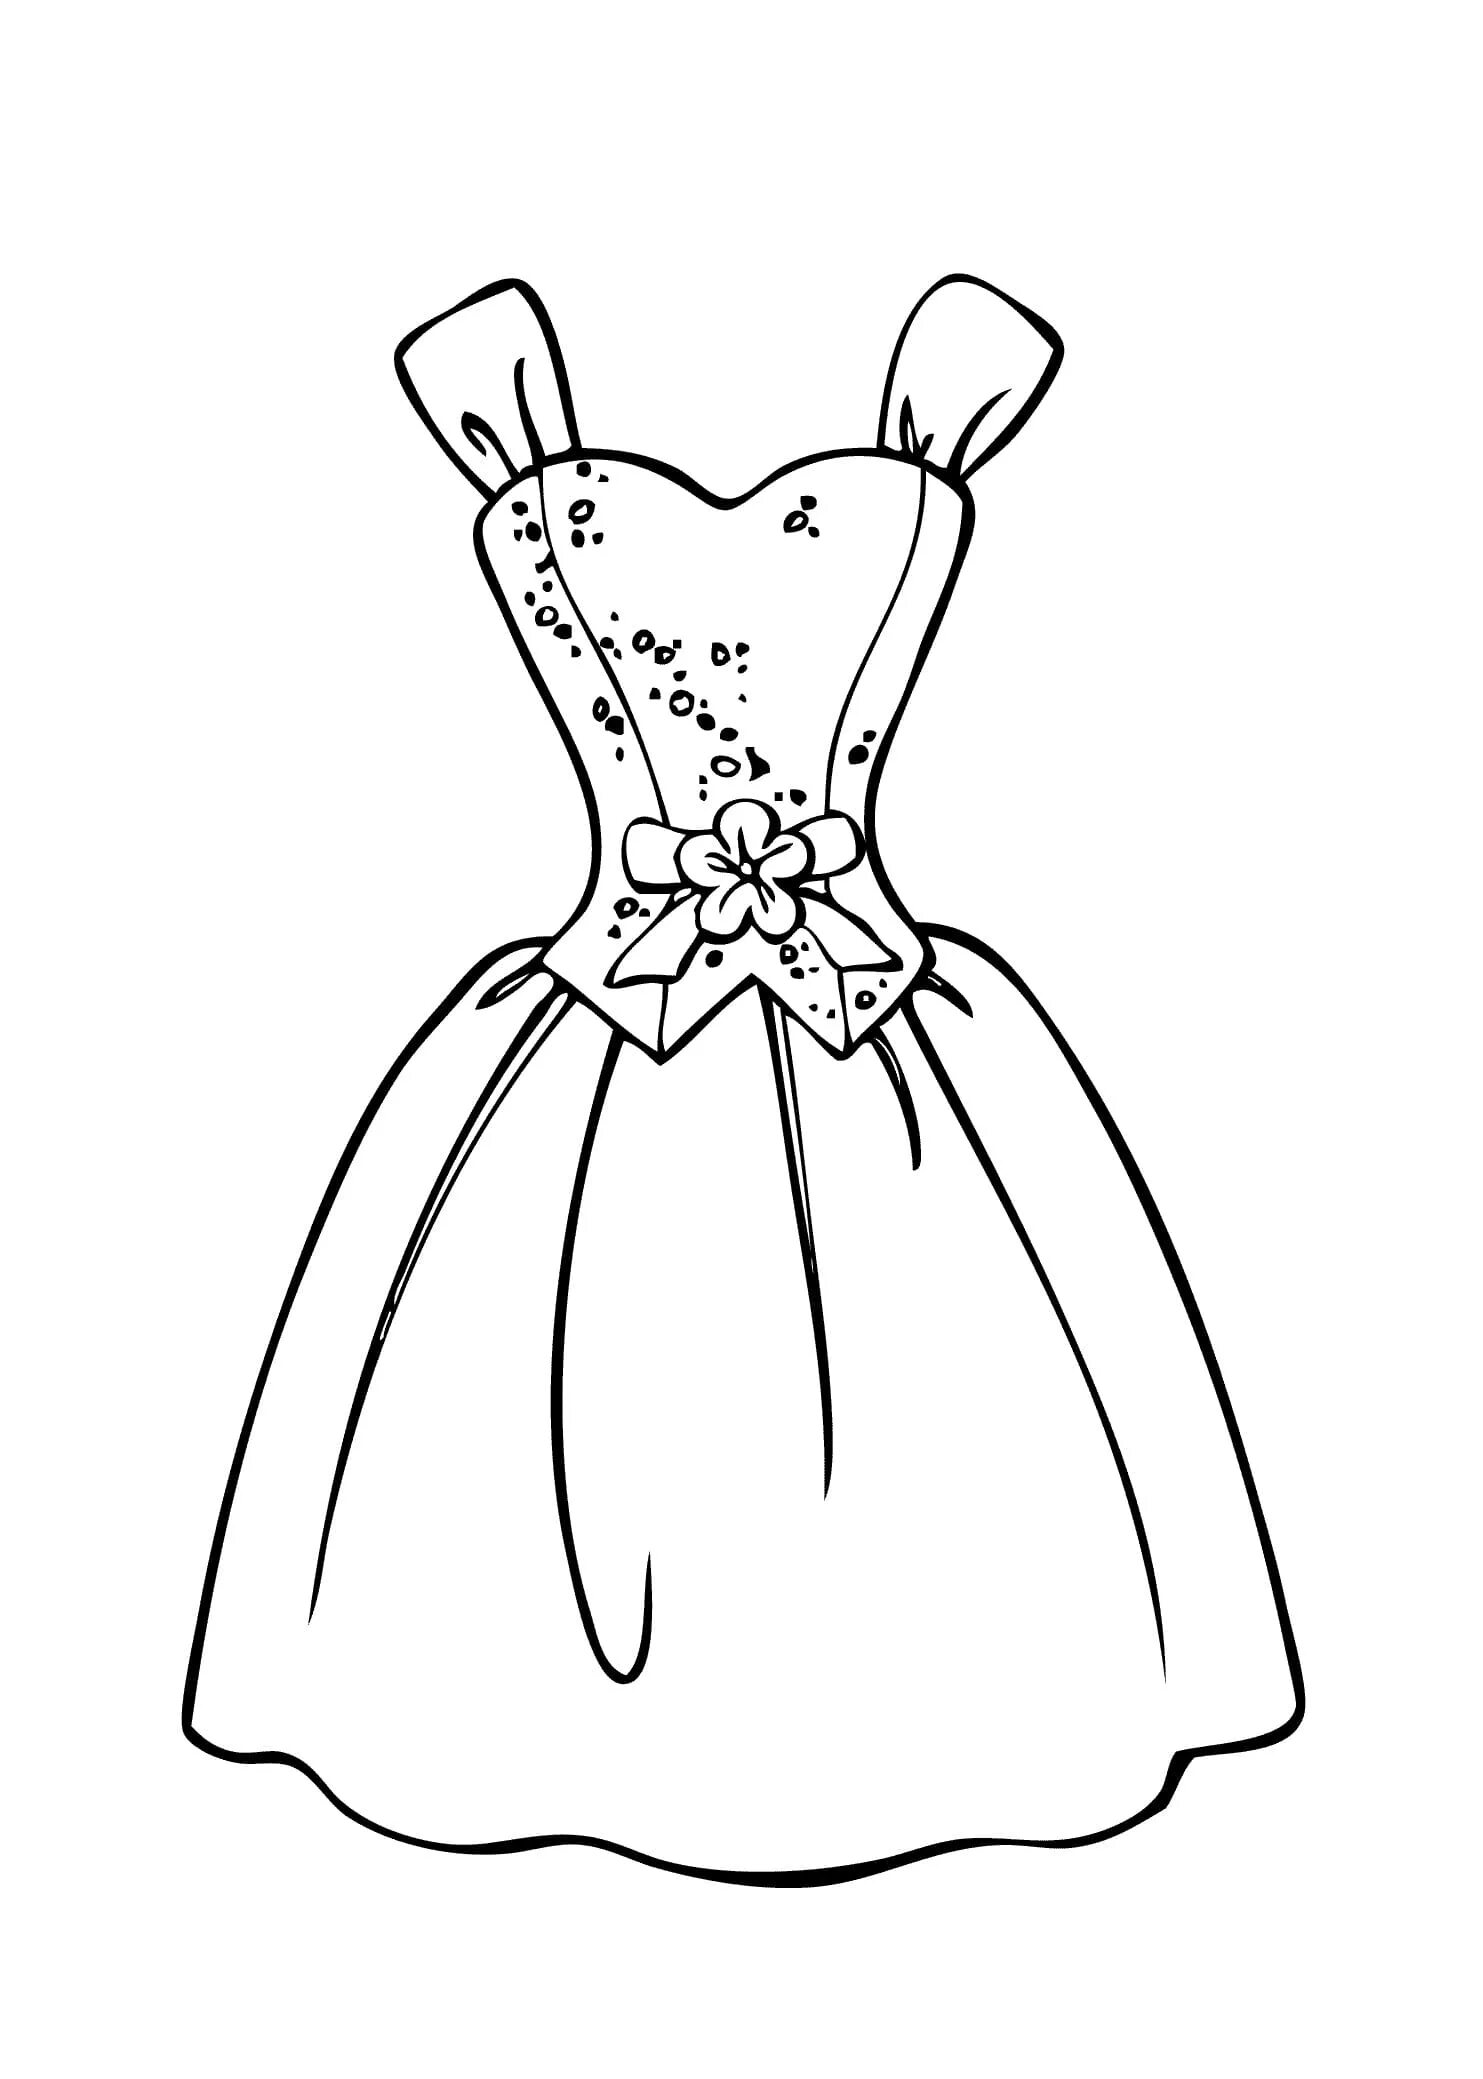 Coloring page dazzling doll dress for children 4-5 years old